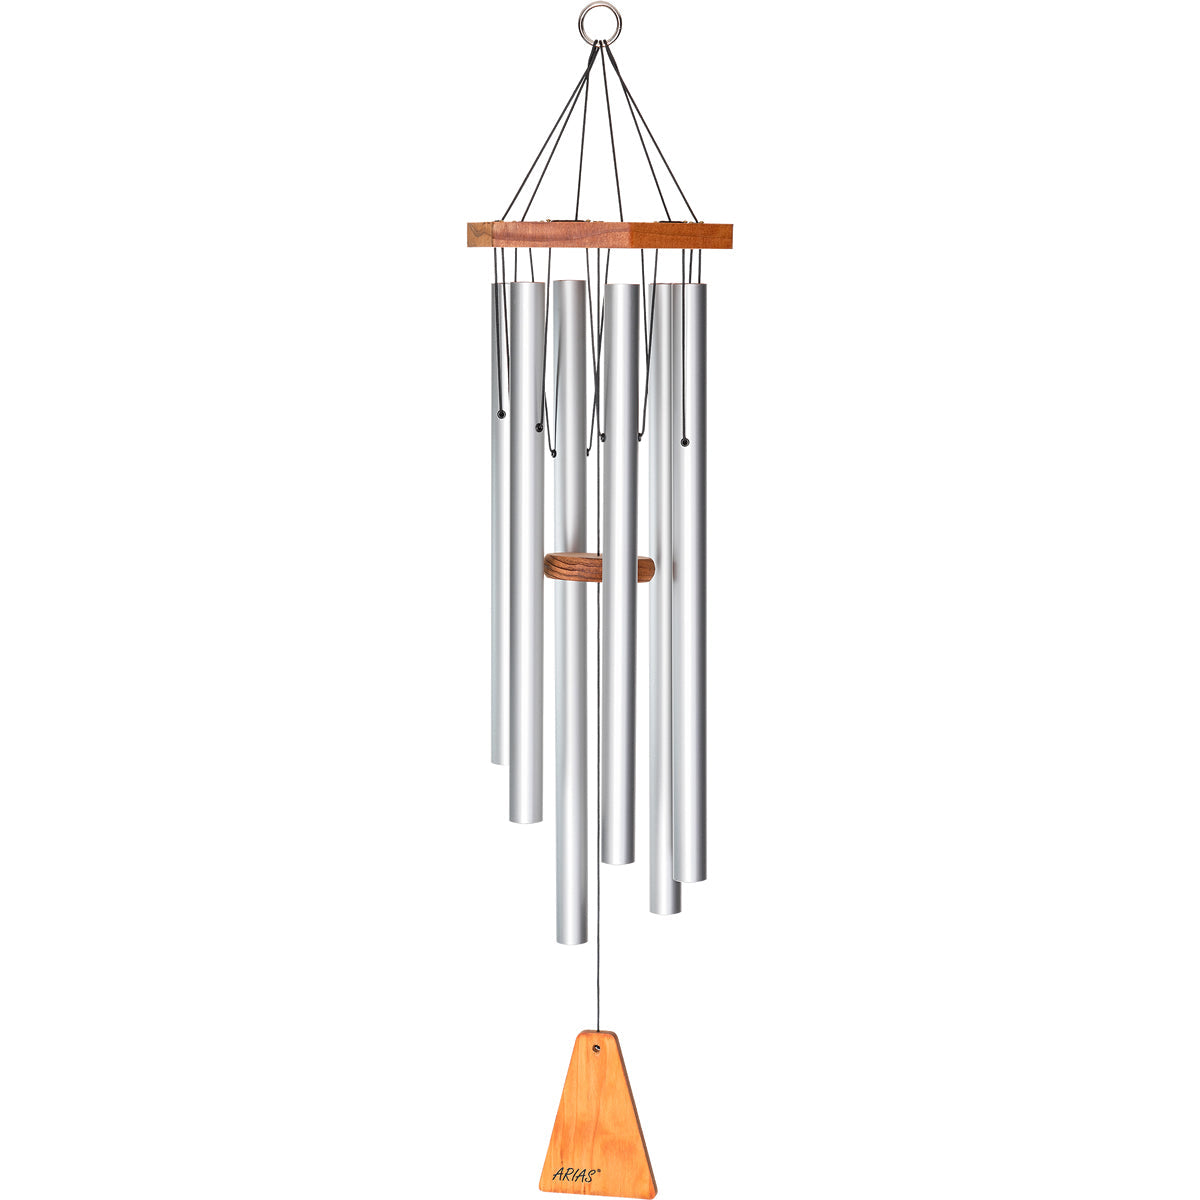 Arias 34-inch Wind Chime - Silver Finish Tubes (6 Tubes)